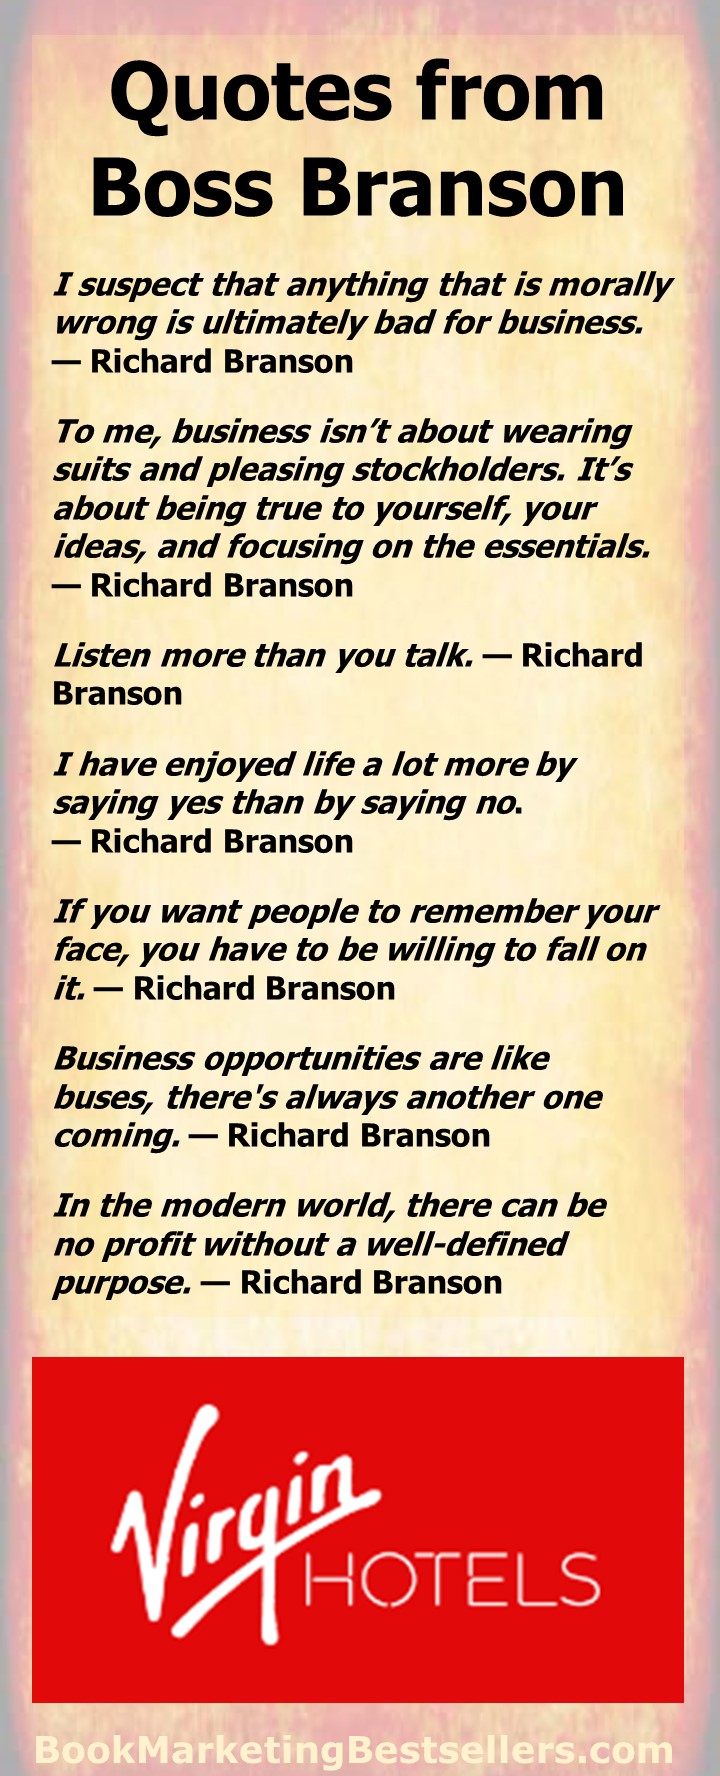 Business Quotes from Richard Branson - business quotations from Richard Branson, billionaire founder of the Virgin Group. You can learn a lot from these simple business observations.